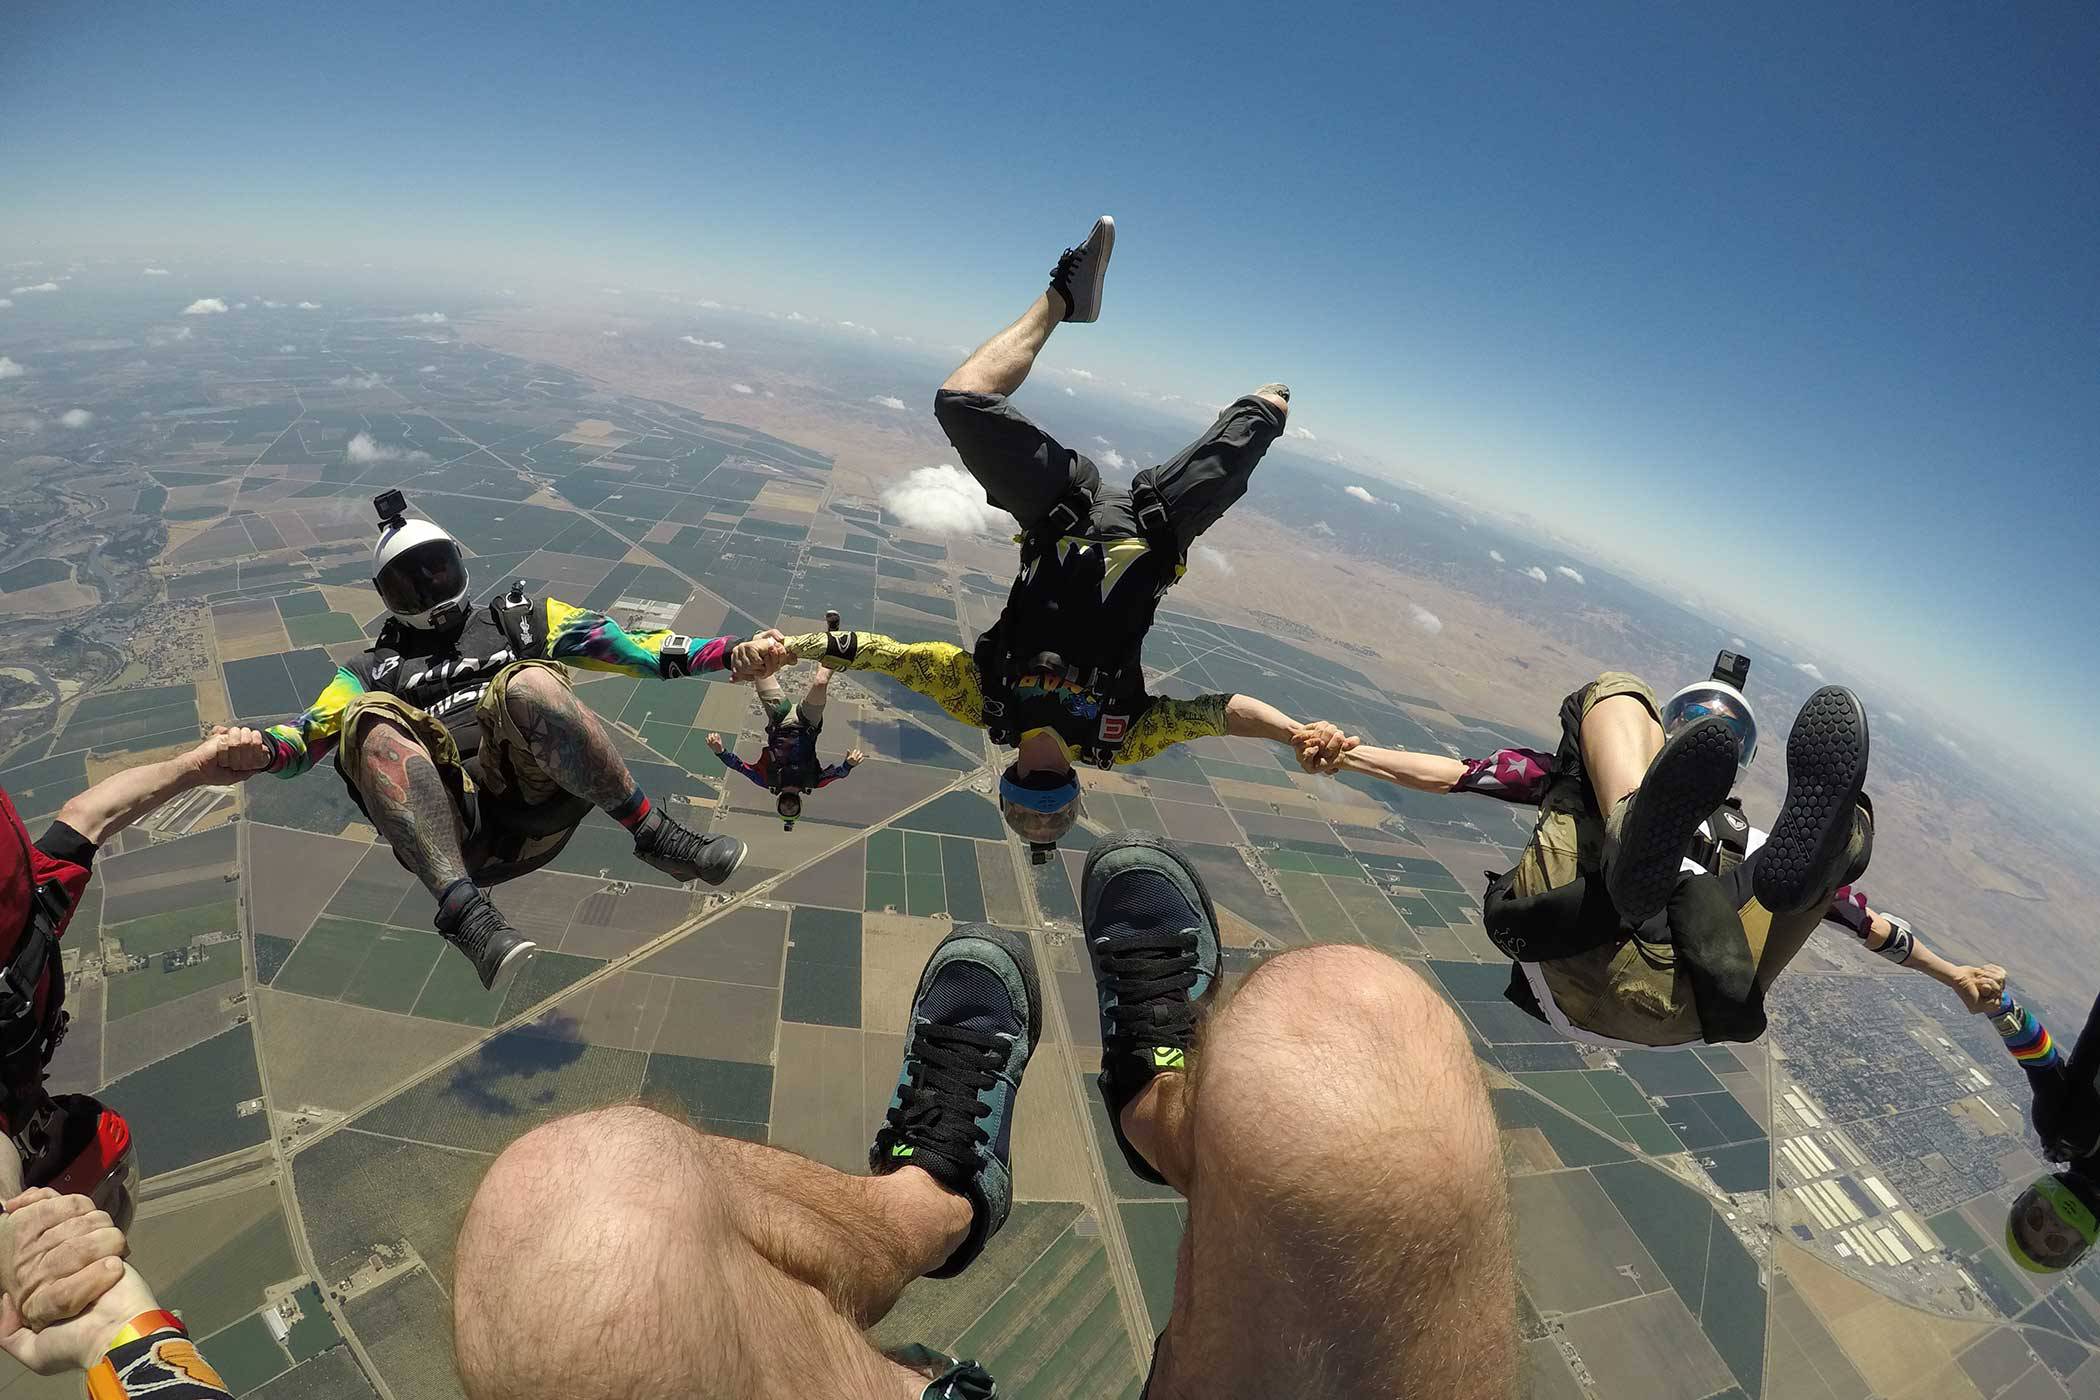 Experienced jumpers information during a skydive